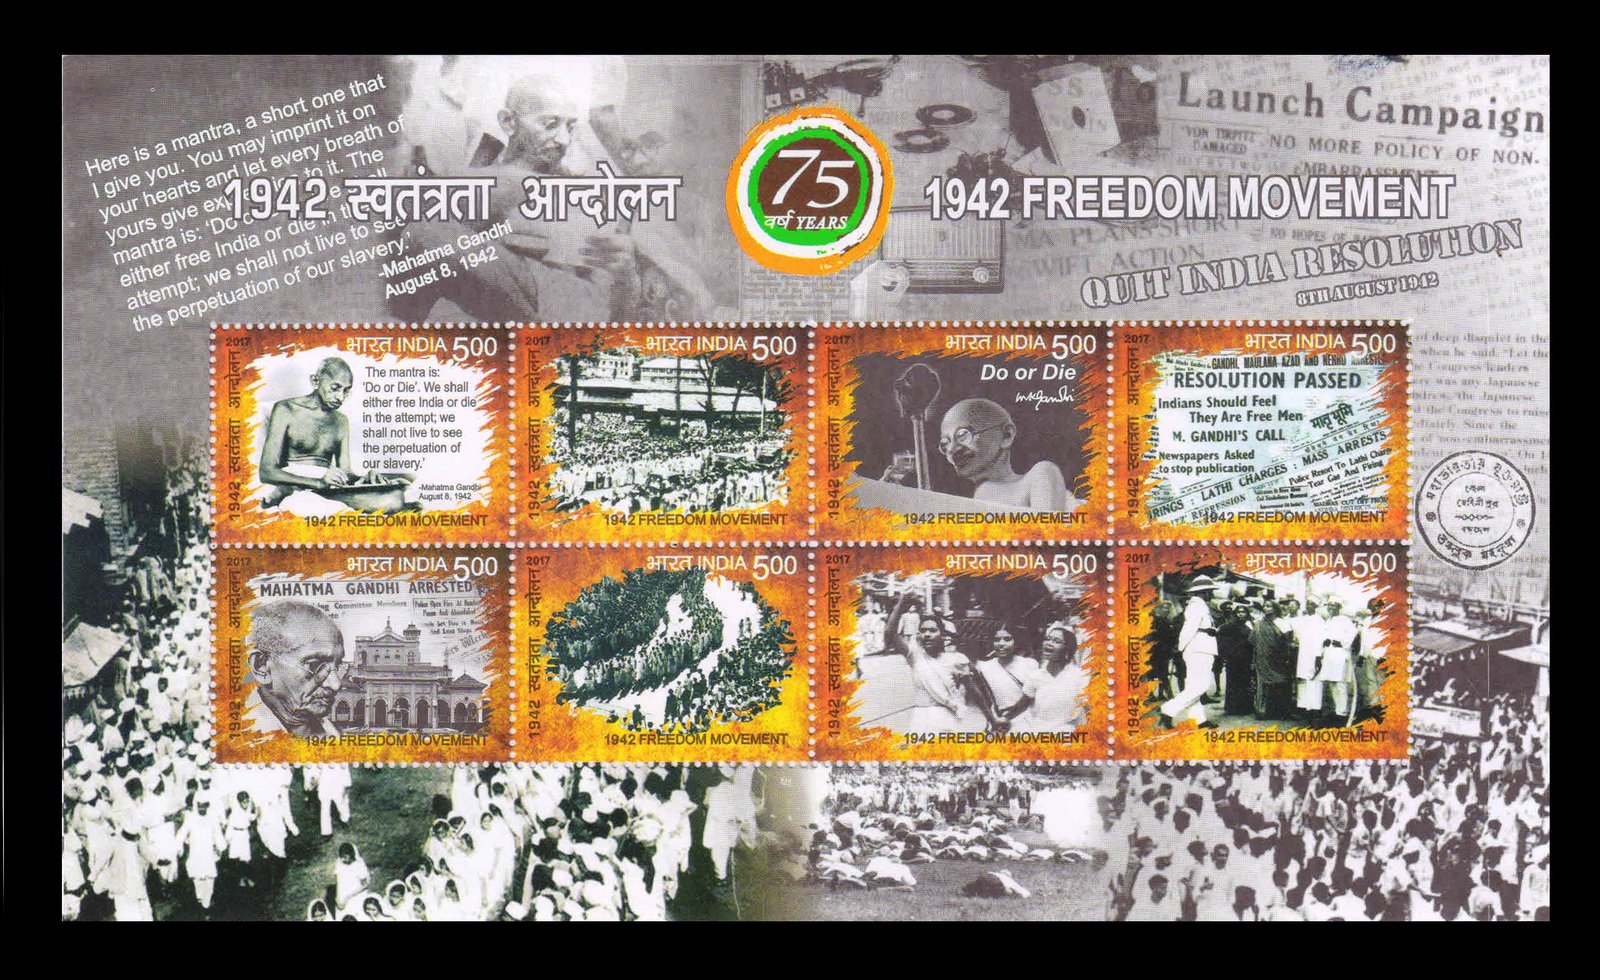 INDIA 2017 - 75th Year of Freedom Movement, Quit India, Gandhi, Miniature Sheet of 8 Stamps, MNH